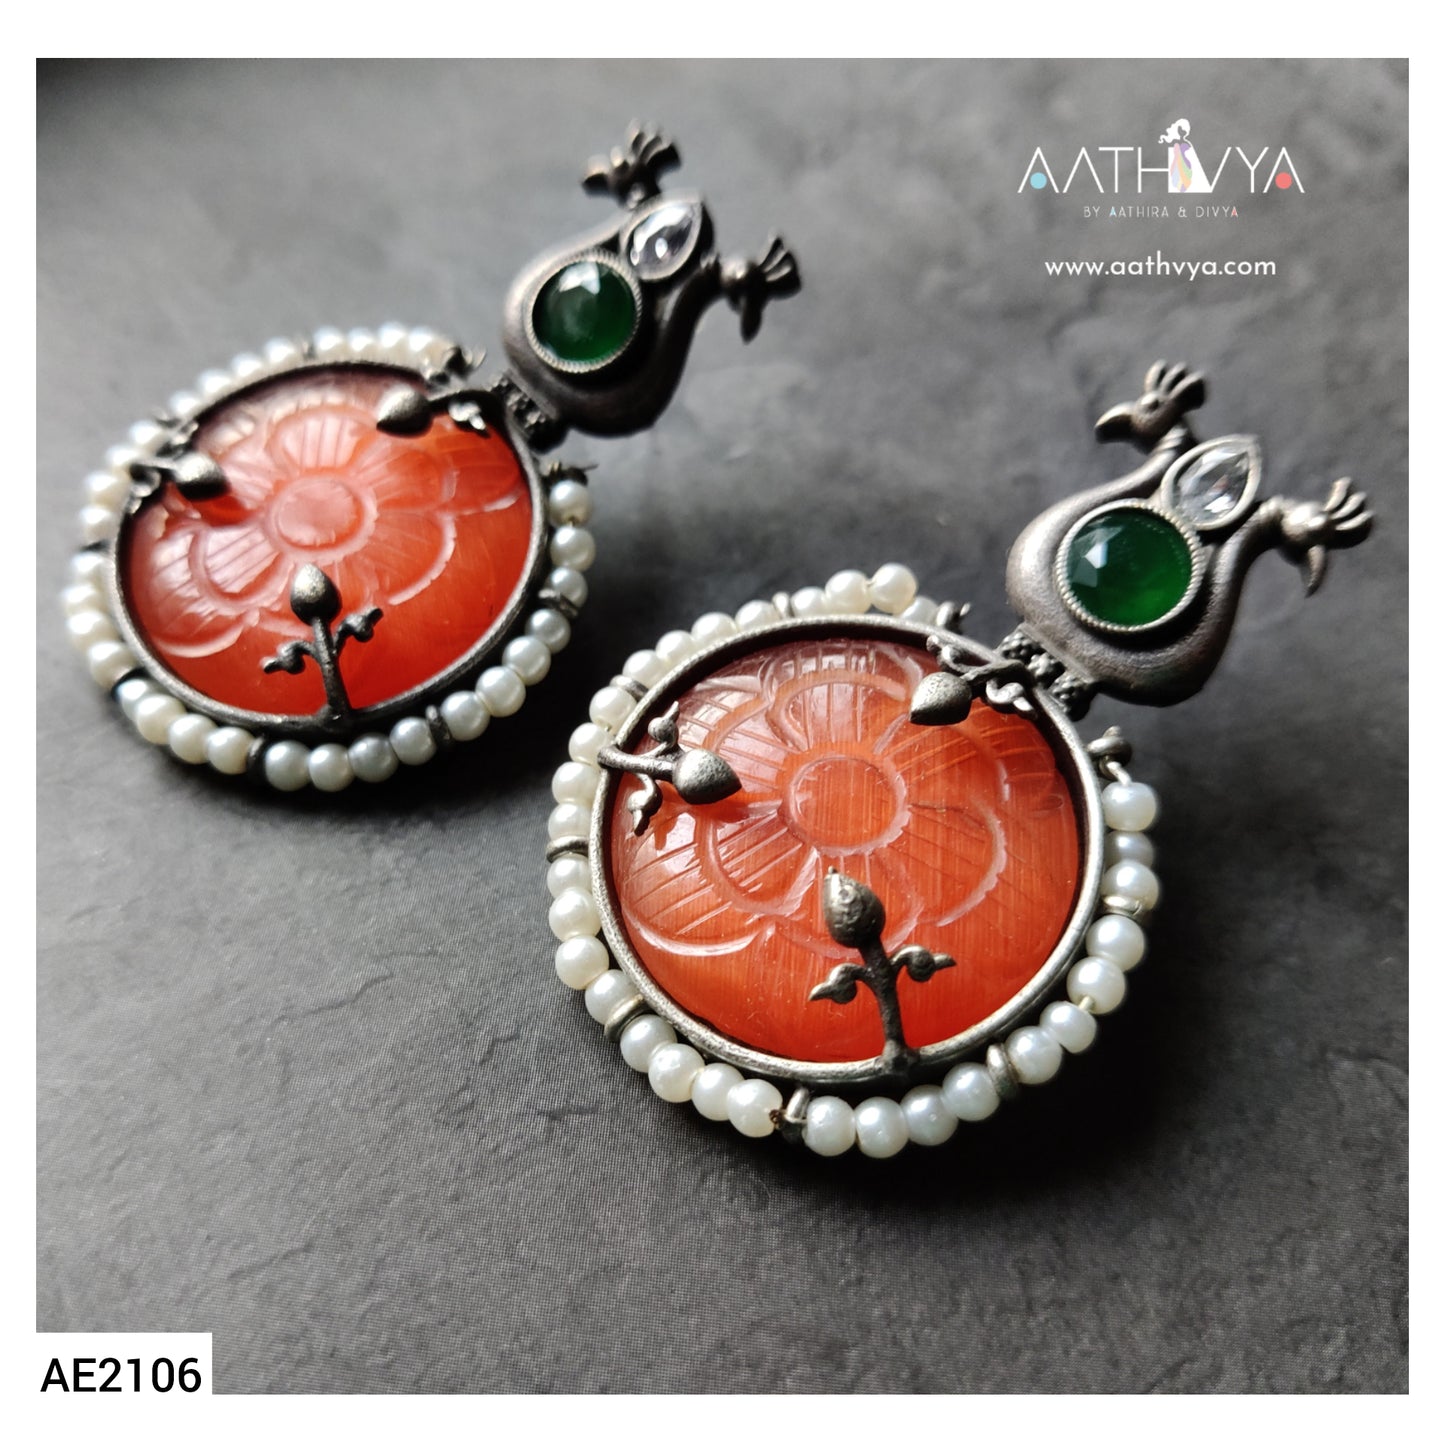 CARVED STONE PEACOCK EARRING - AE2106